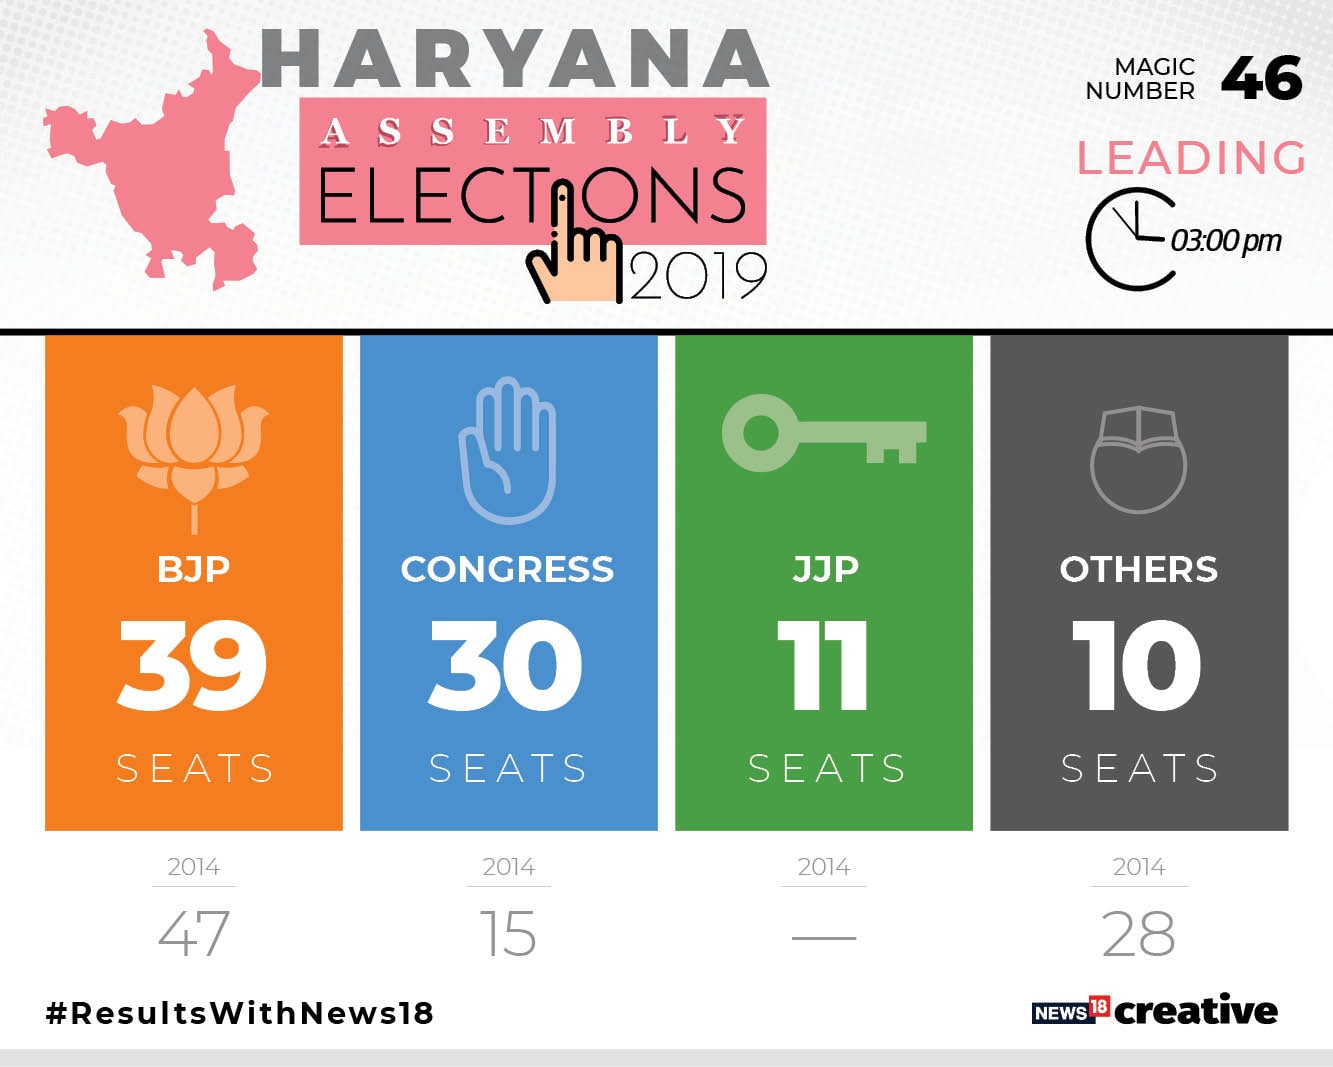 Haryana Assembly elections result